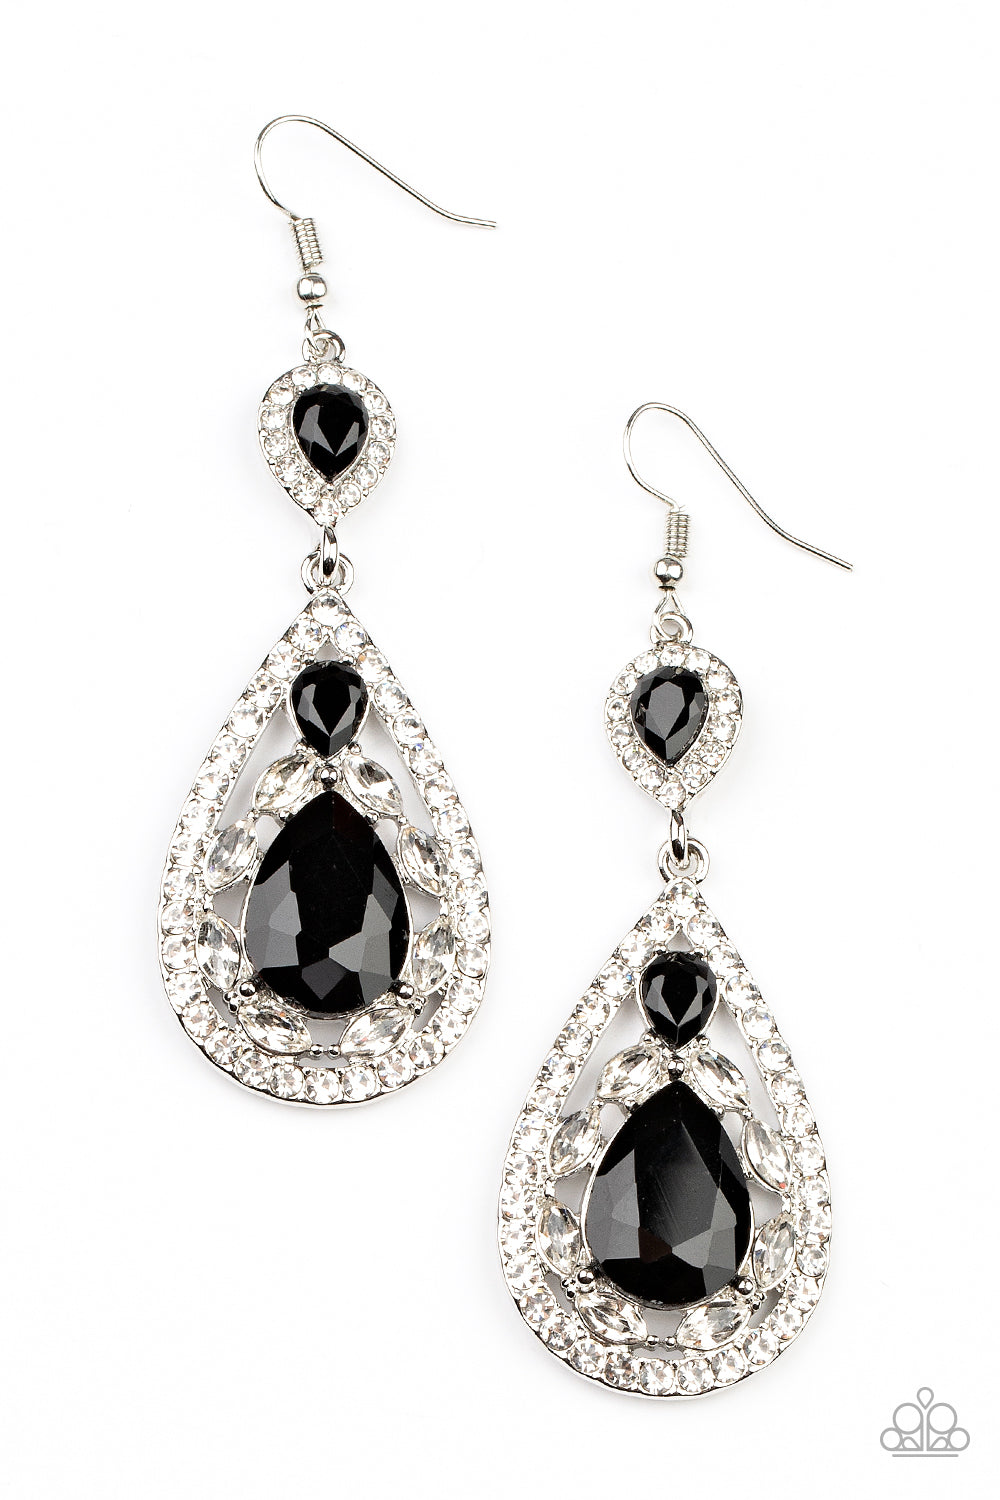 Paparazzi Life of the Party Exclusive January 2022 - Paparazzi Posh Pageantry Black Earrings